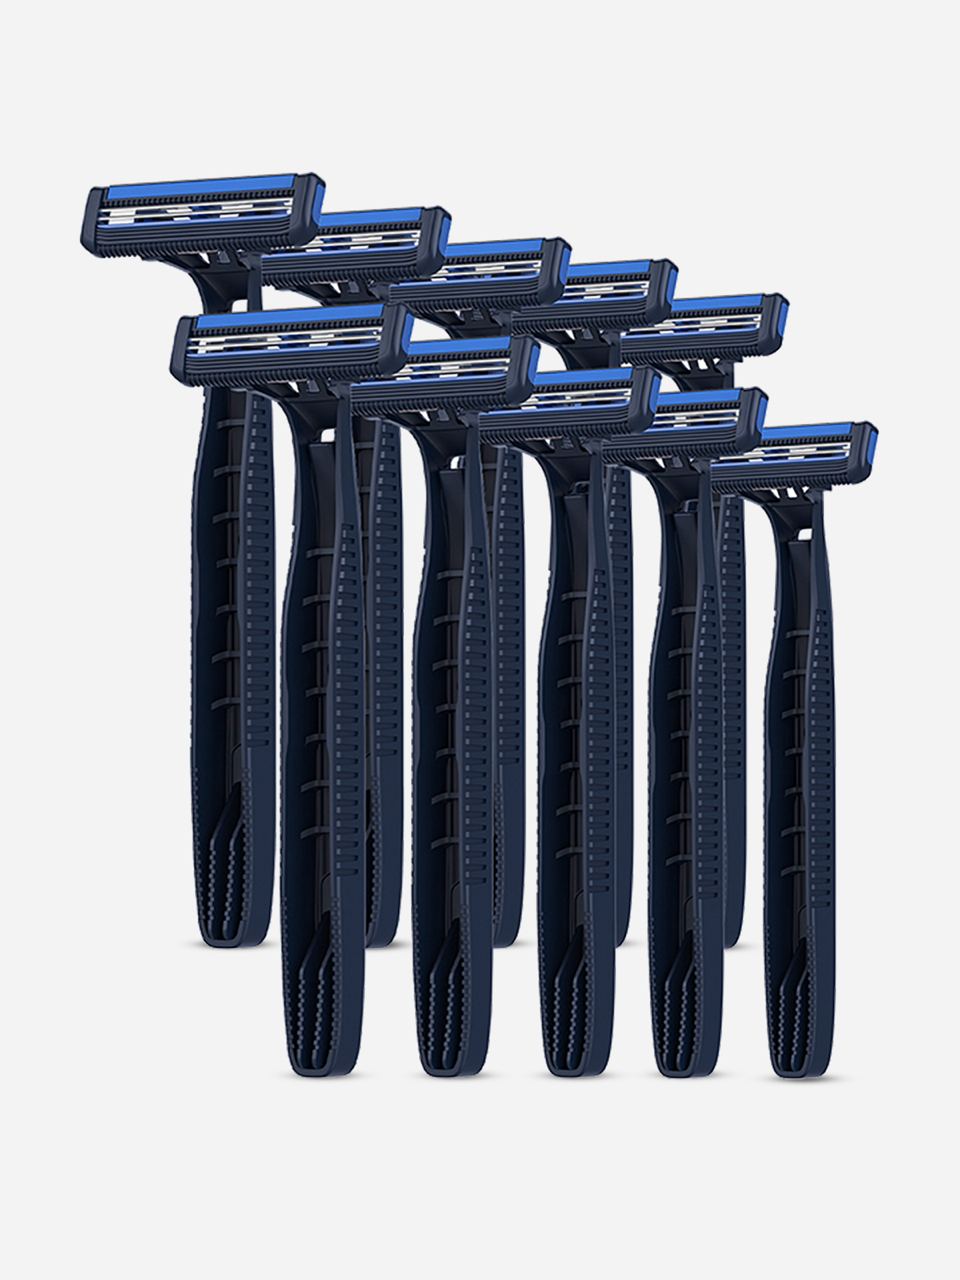 (Top Deal) Pack of 10 LETSSHAVE Pro Disposable Twin Blade Shaving Razors @ Just ₹134